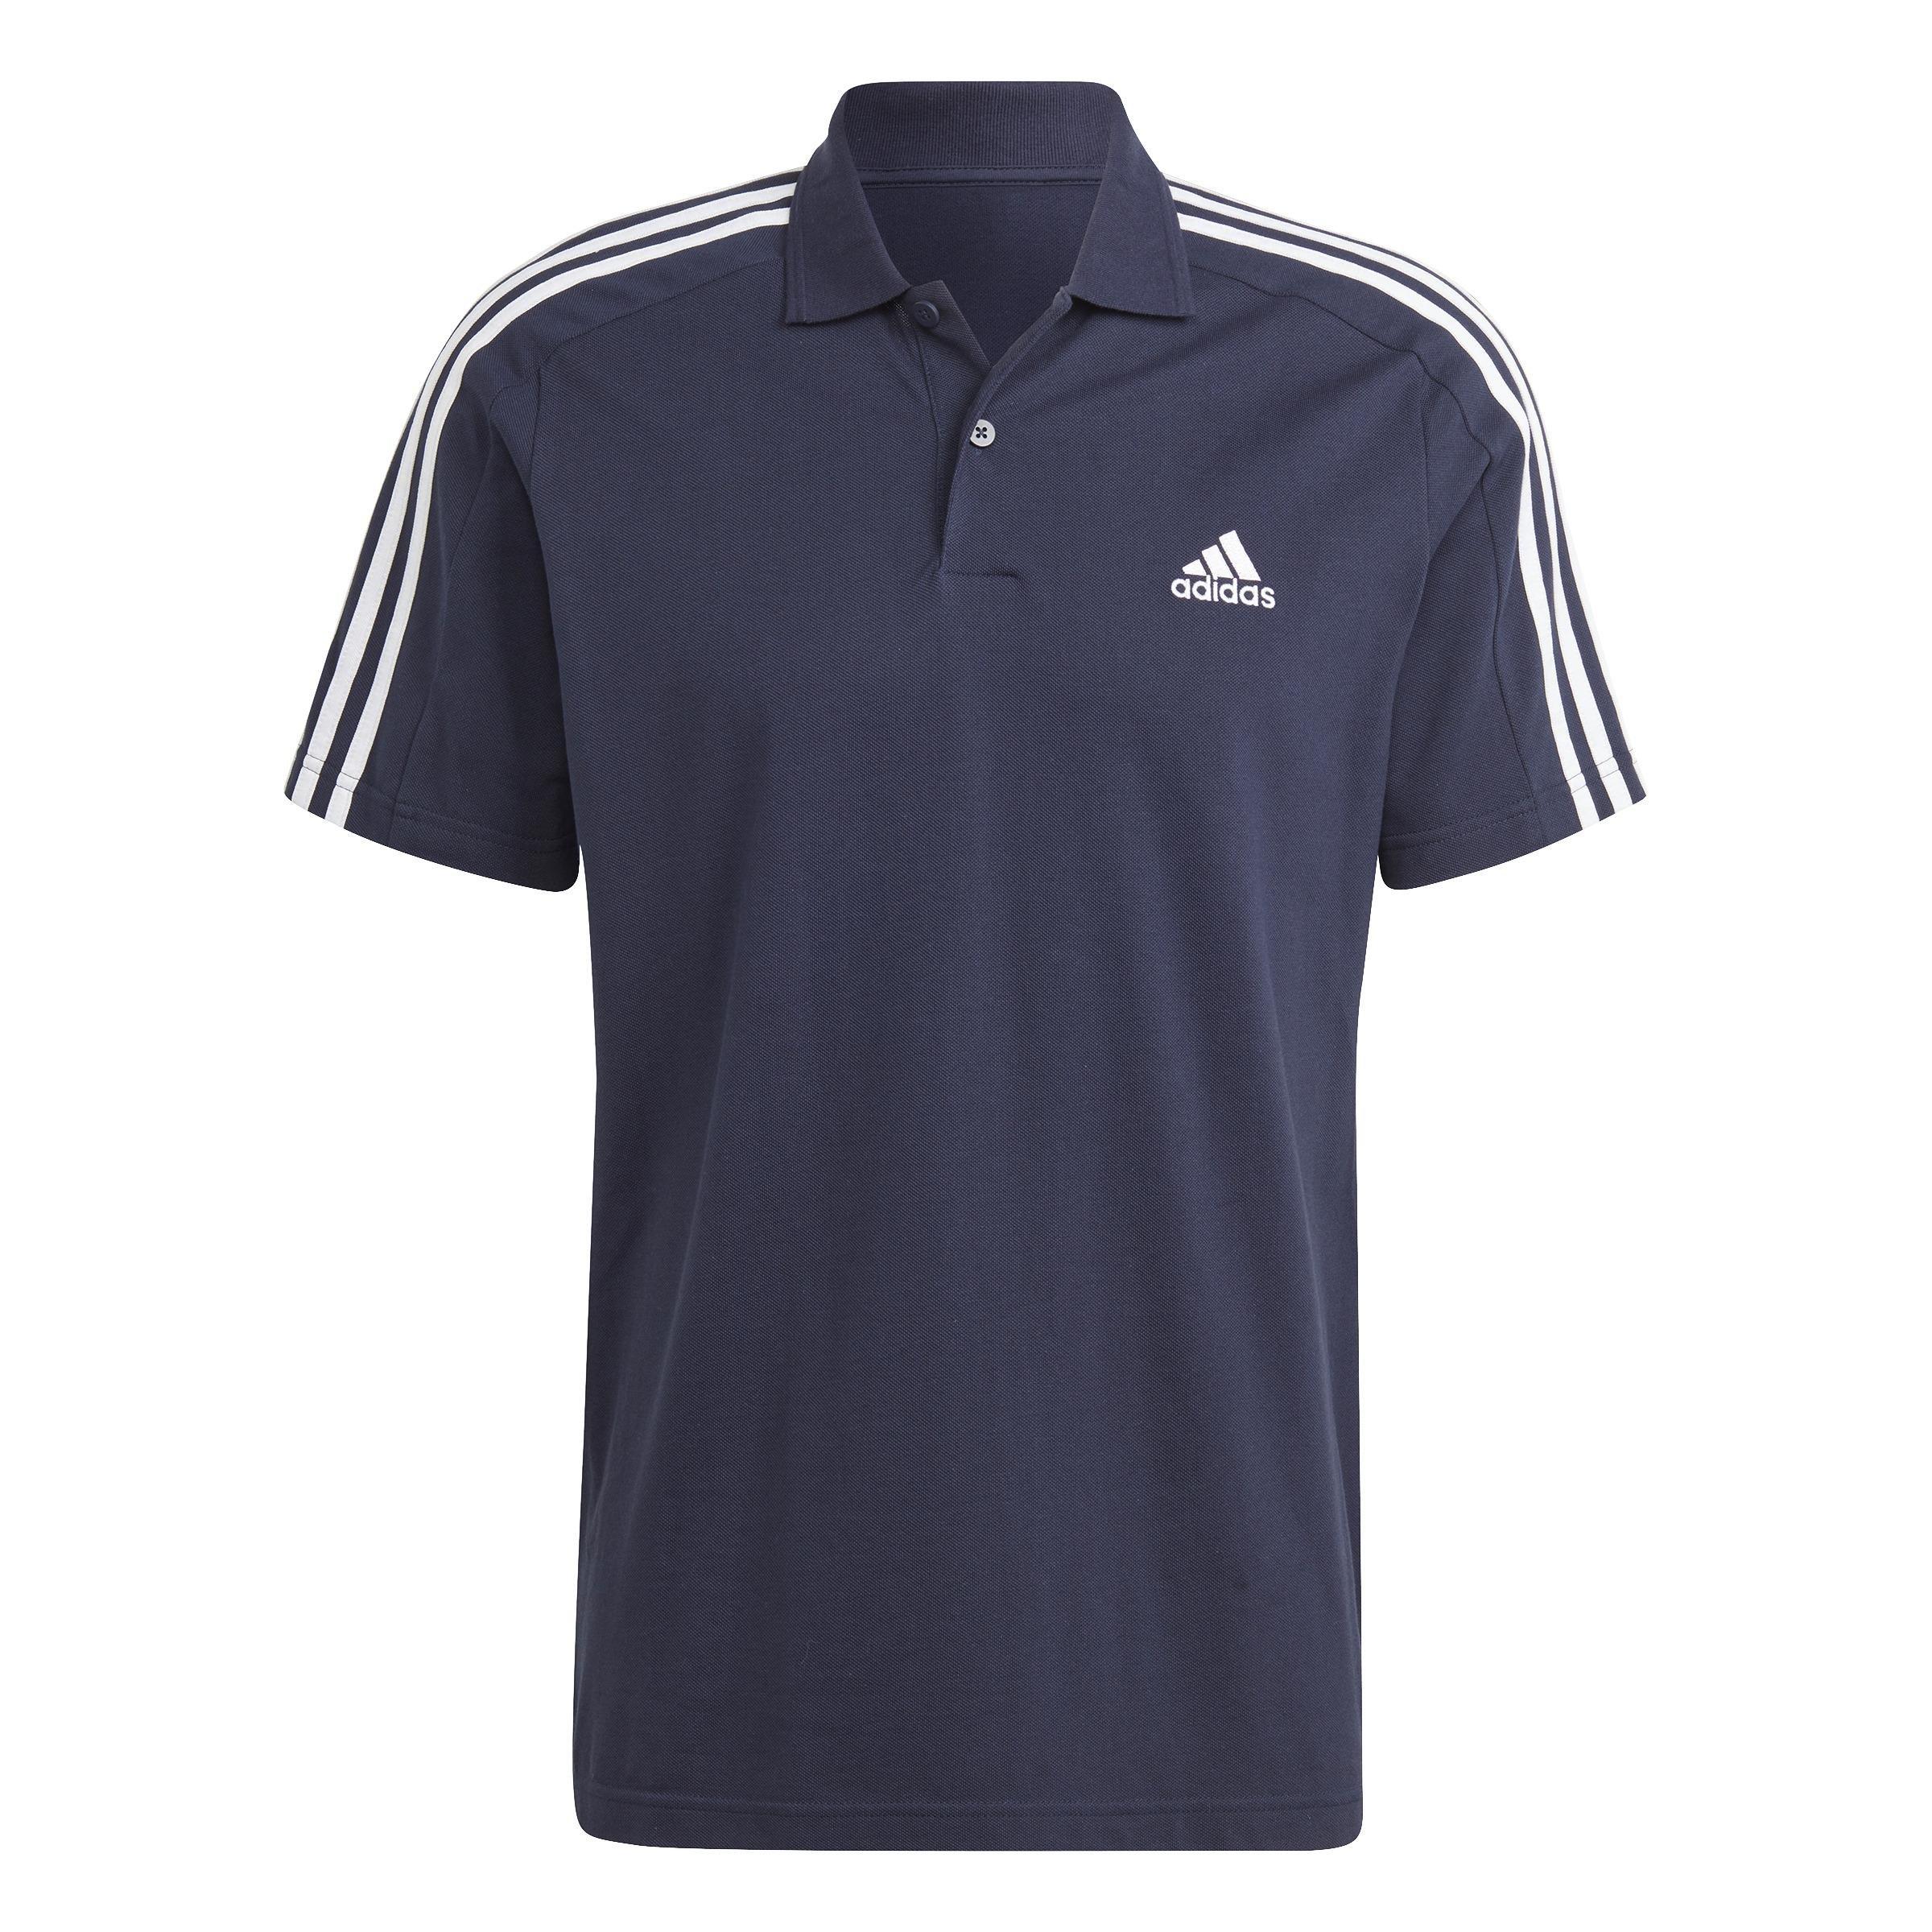 adidas - Essentials Piqu?� Embroidered Small Logo 3-Stripes Polo Shirt legend ink Male Adult